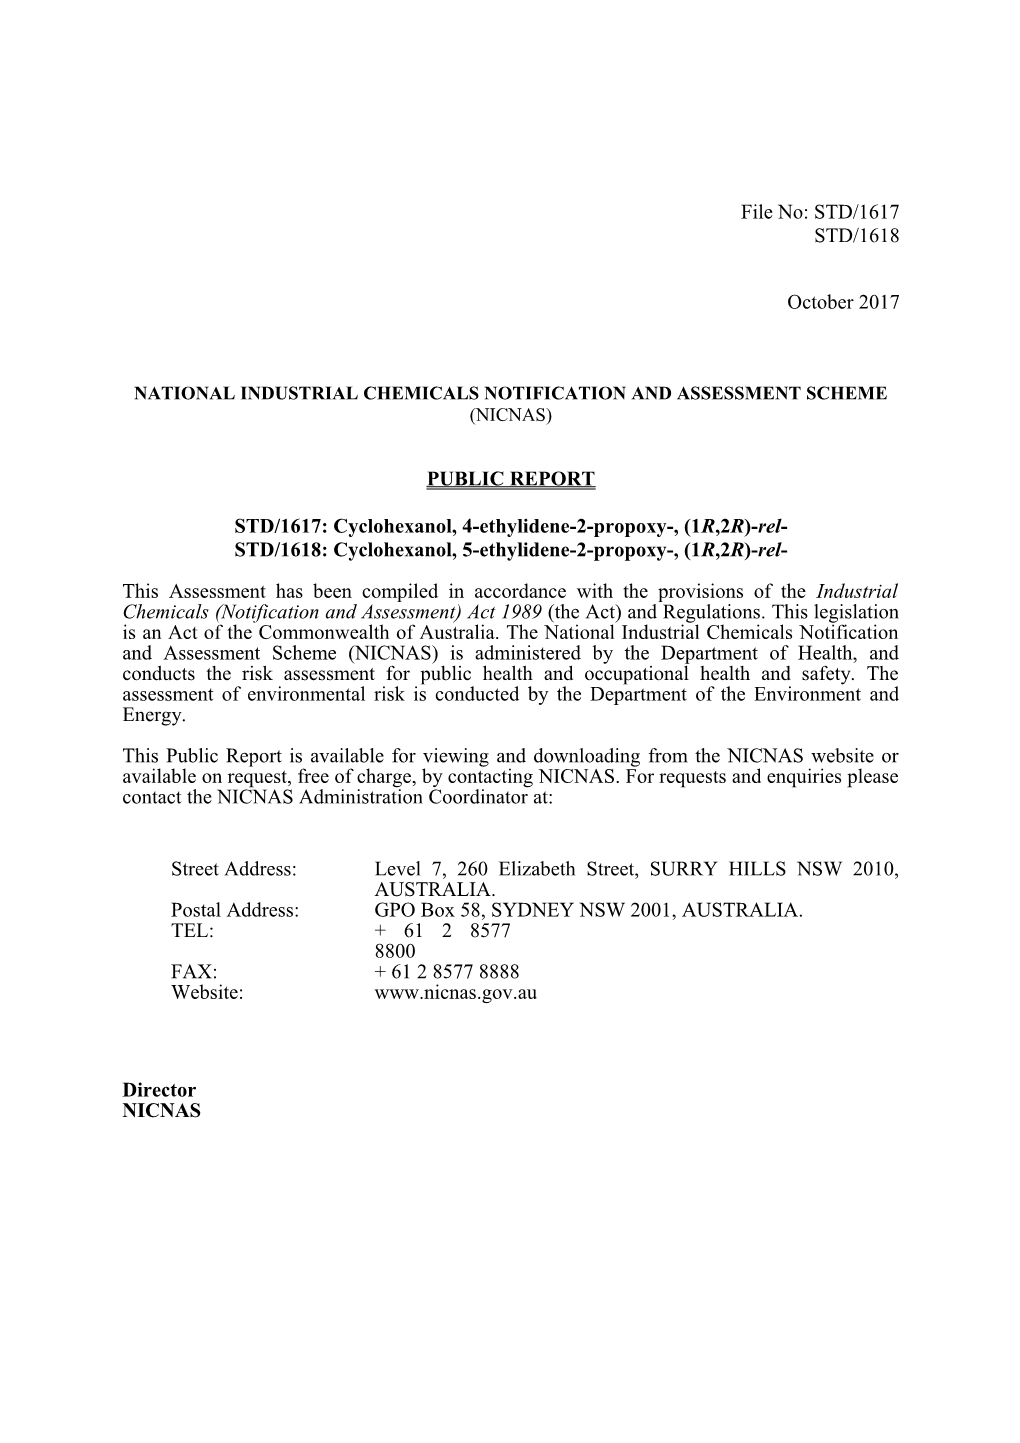 National Industrial Chemicals Notification and Assessment Scheme s28